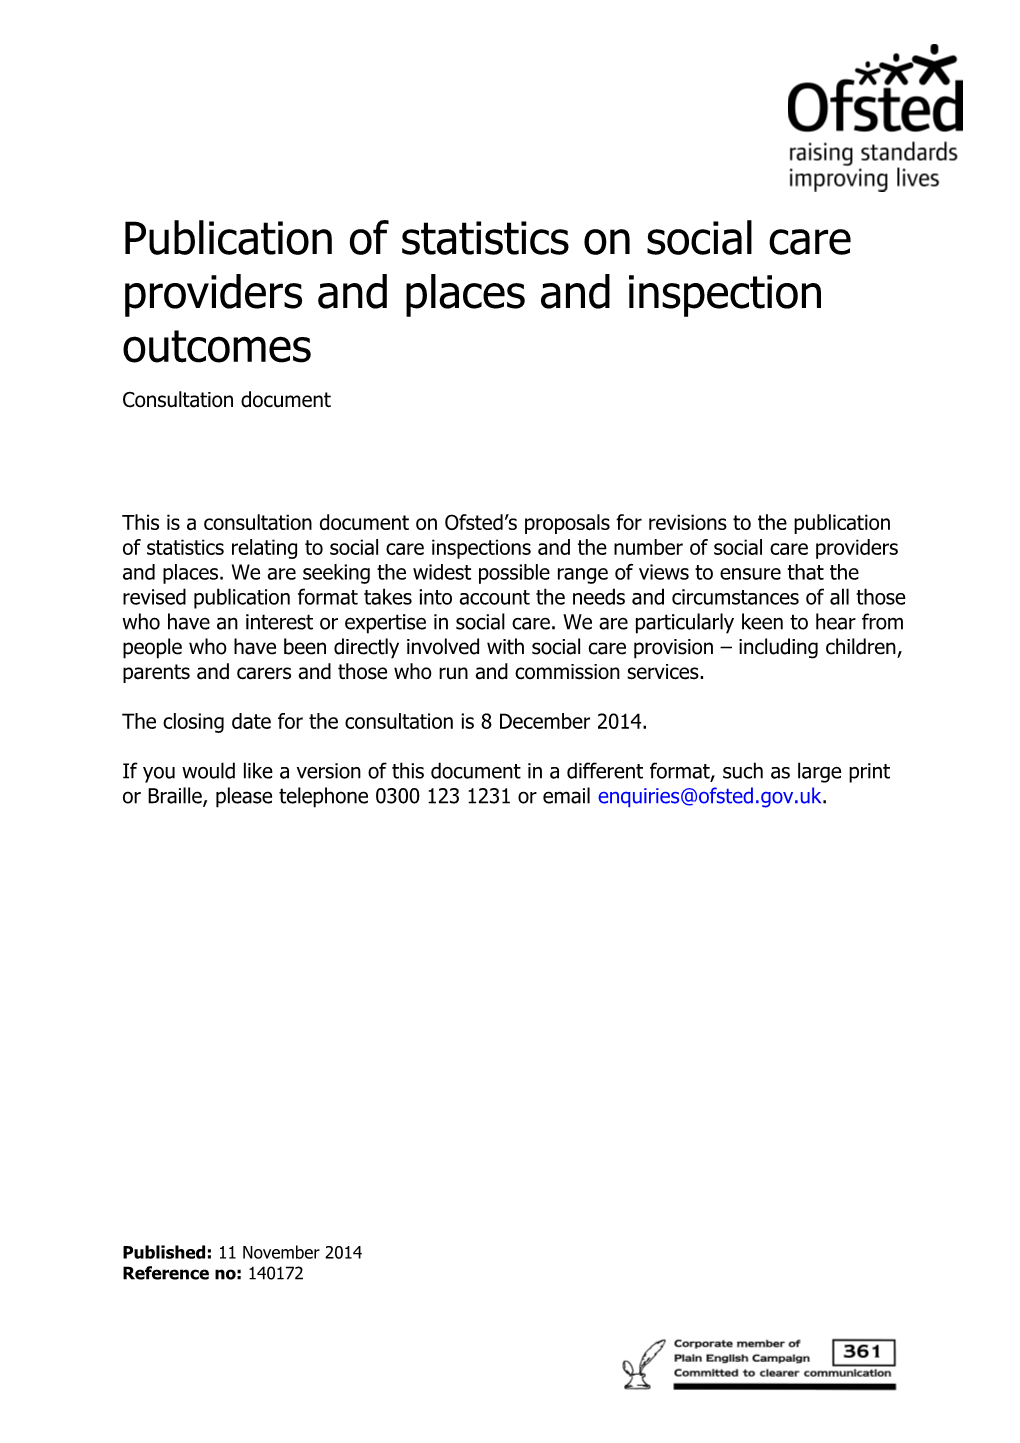 Publication of Statistics on Social Careproviders and Places and Inspection Outcomes